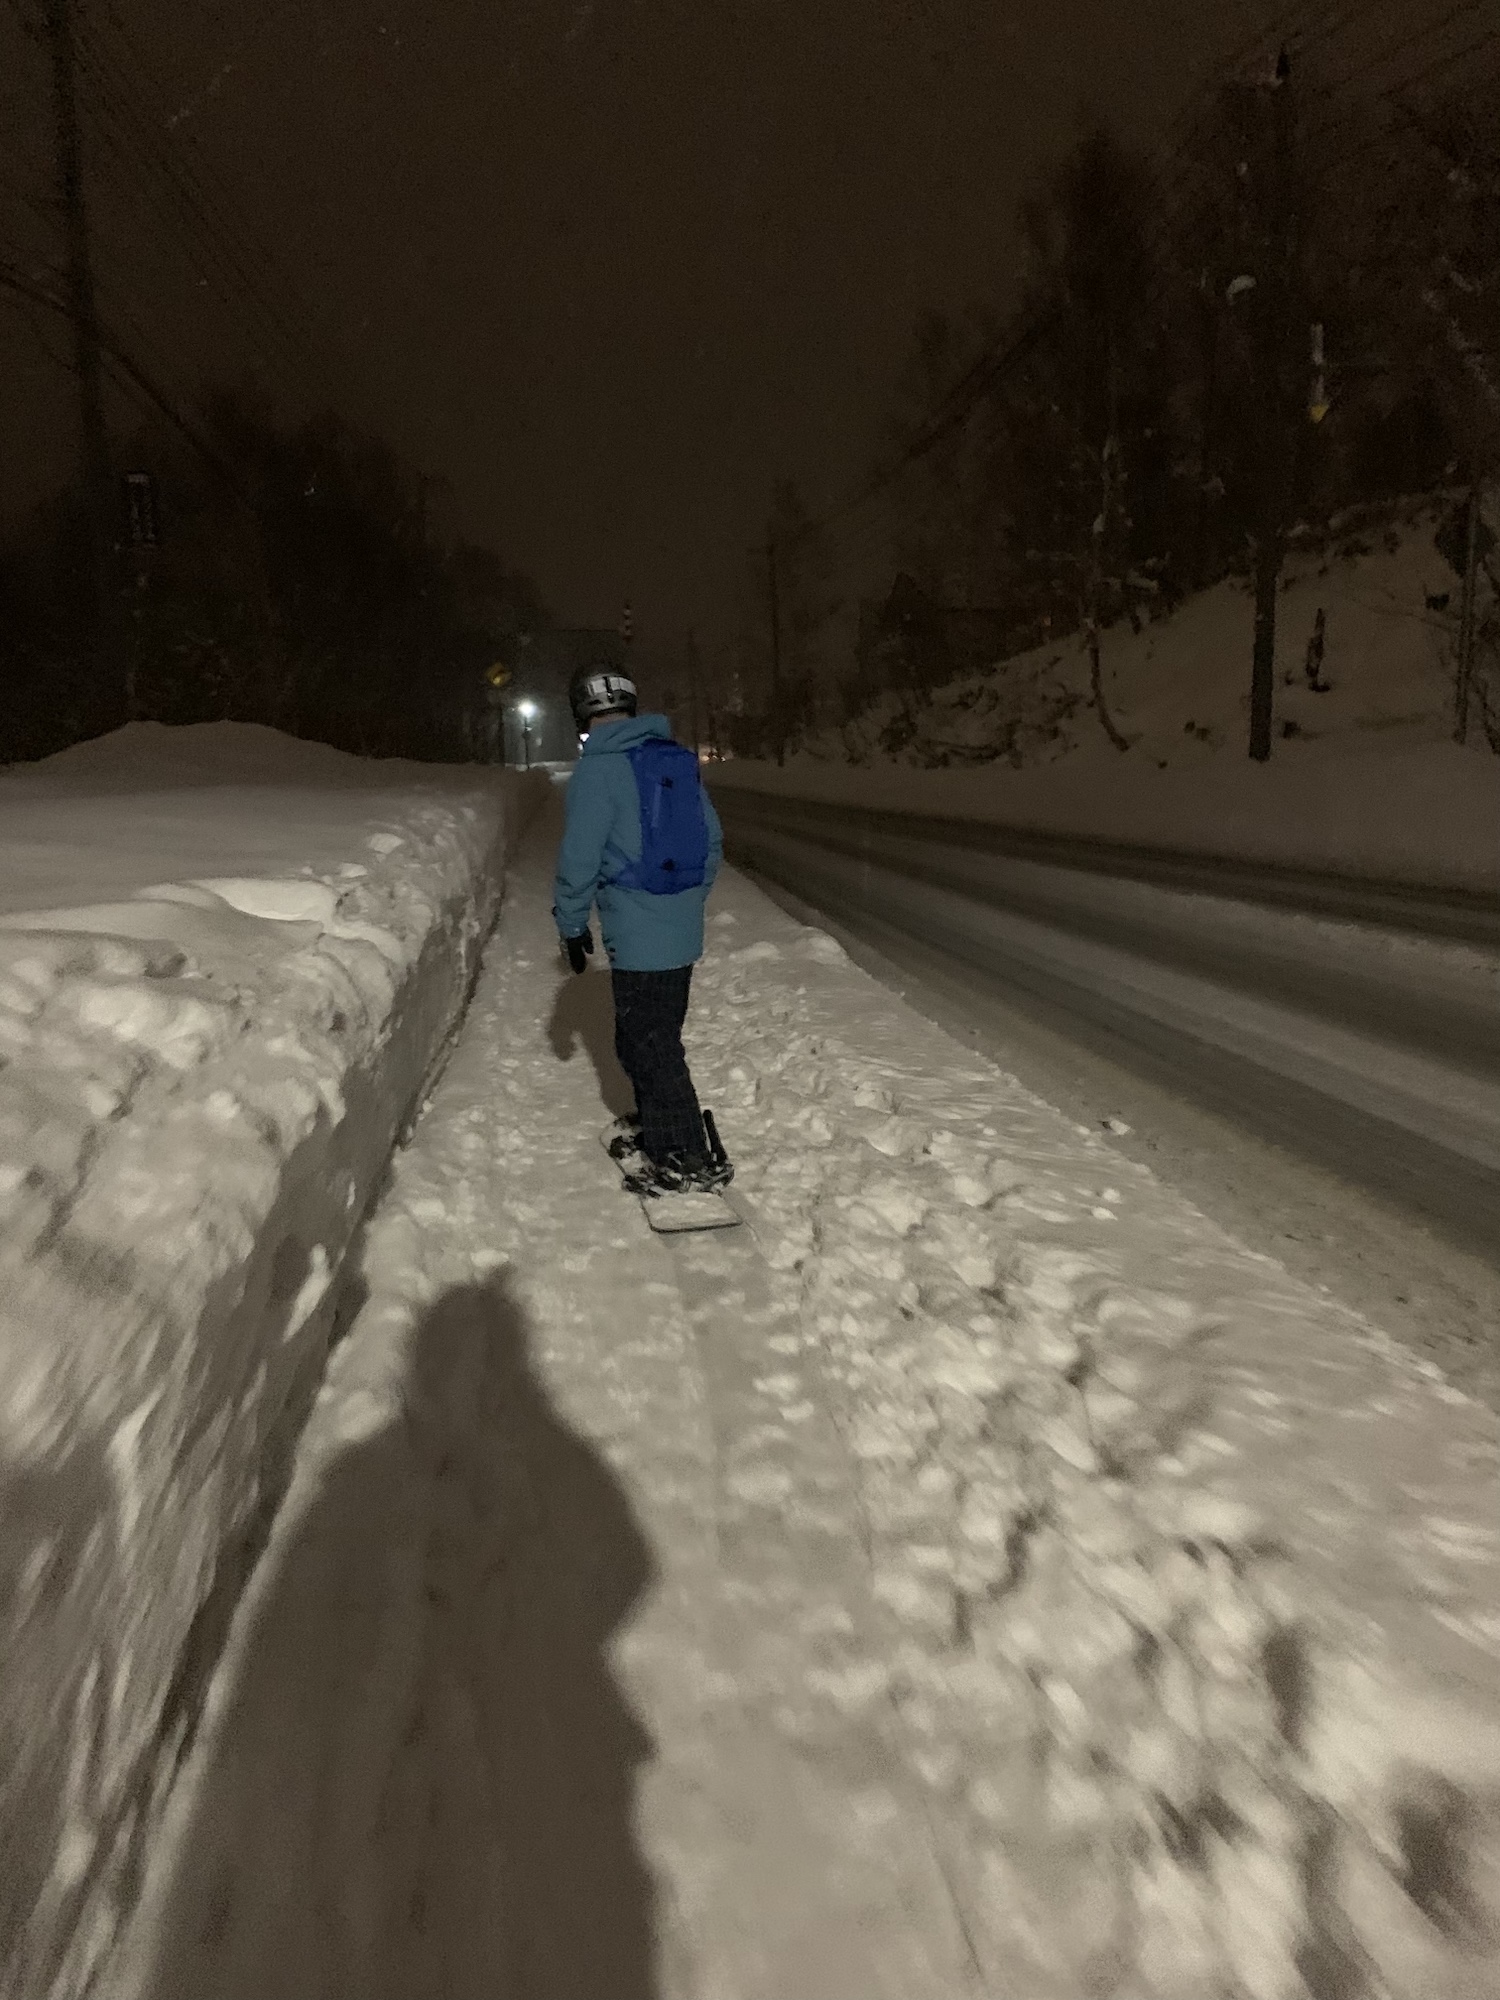 From the bottom of Hirafu you can ski the sidewalk all the way home